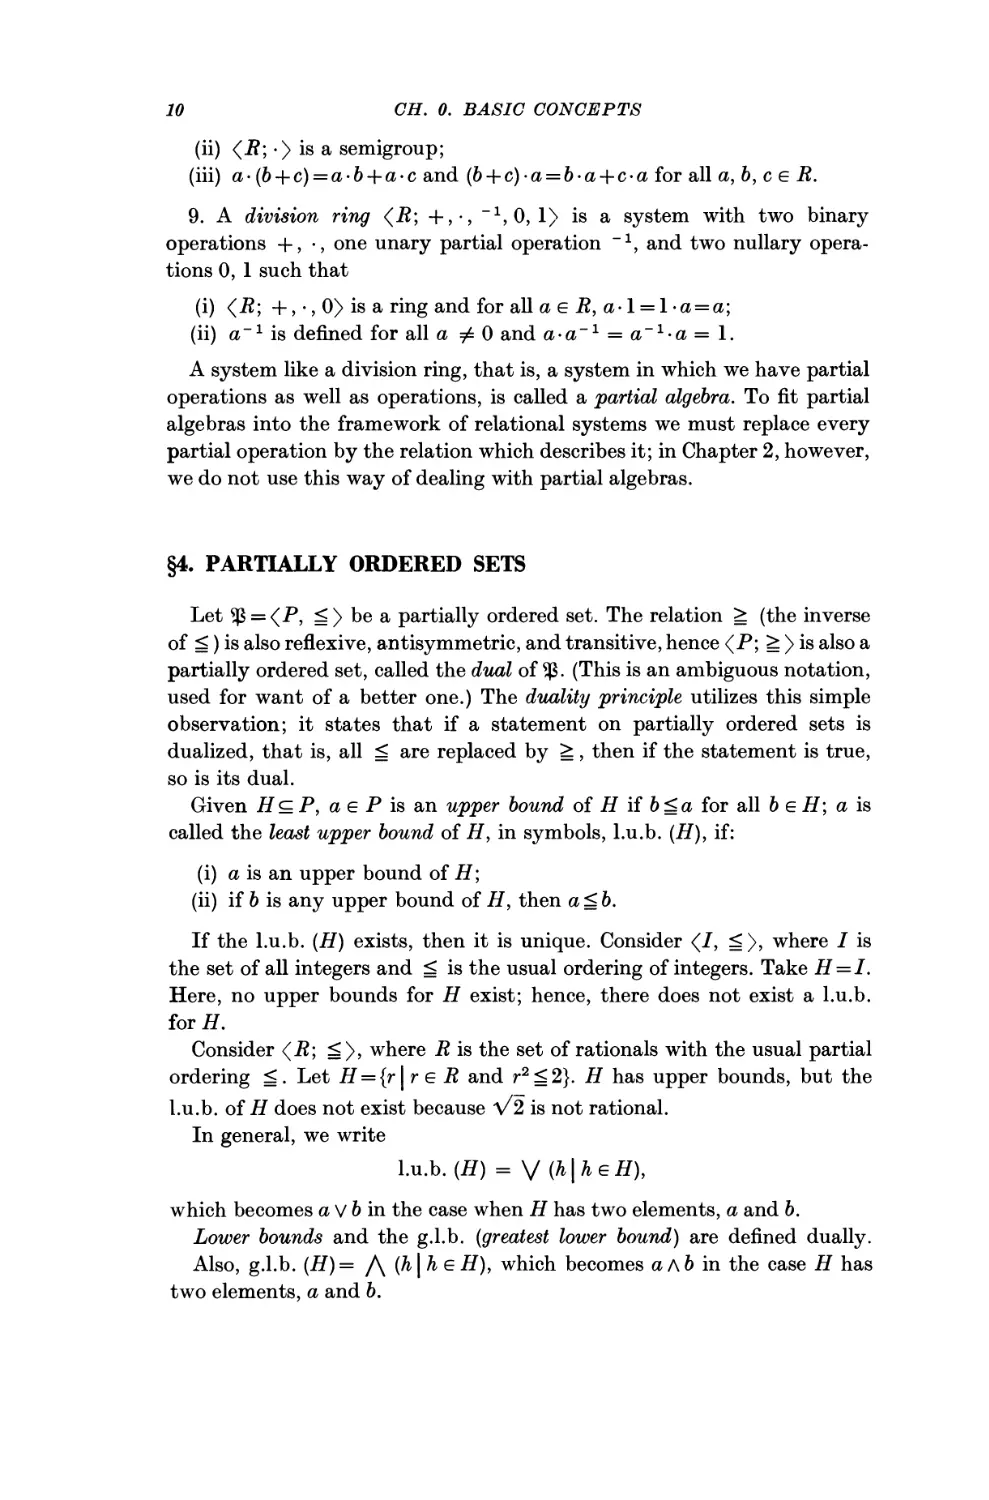 §4. Partially Ordered Sets